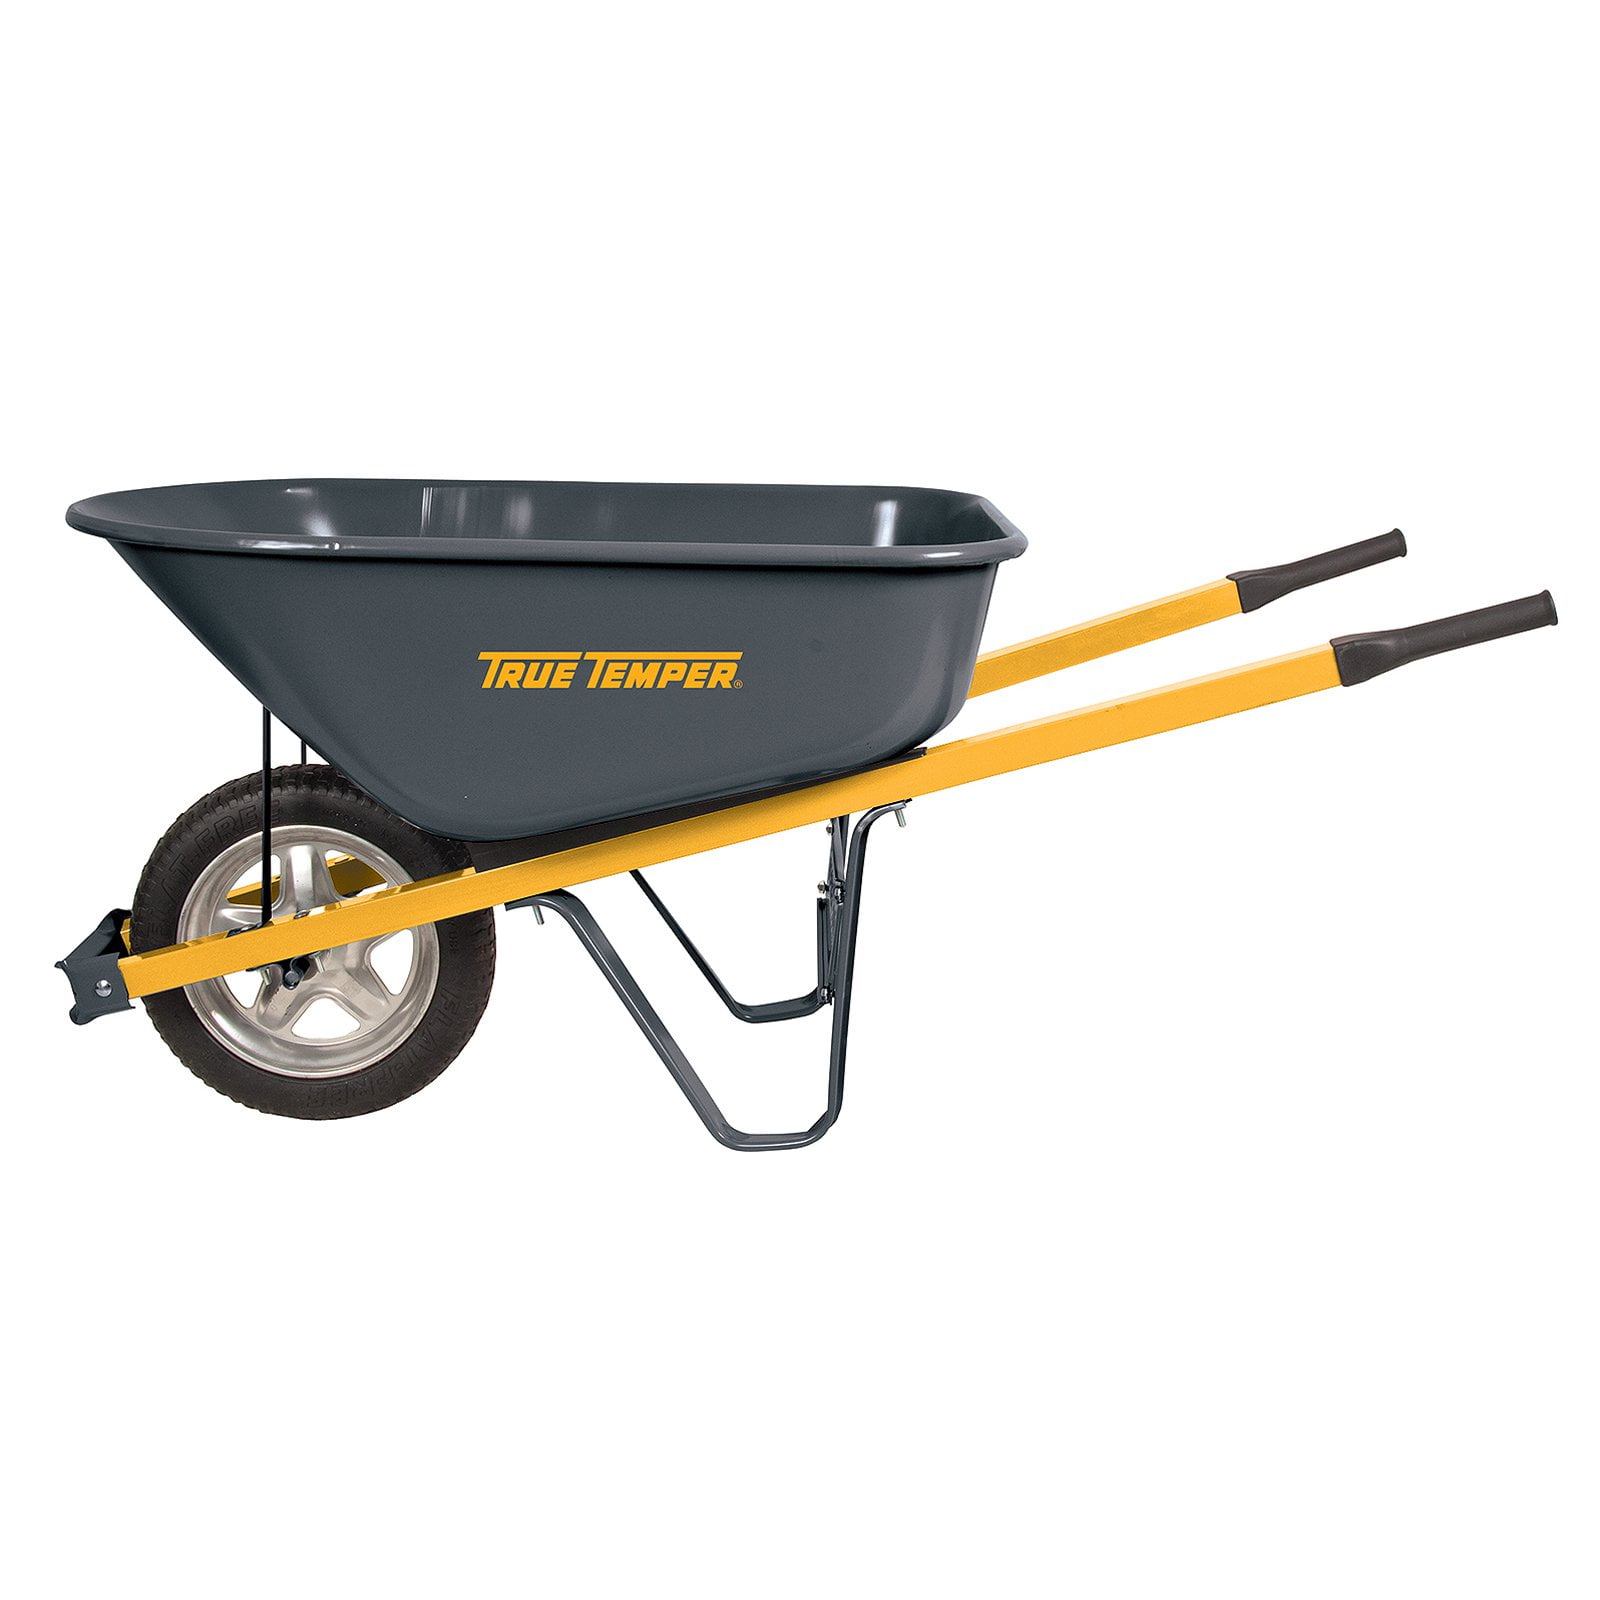 True Temper 6 cu. ft. Wheelbarrow with Steel Handles and Flat Free Tire  (Pack of 2) 10000-03685 - The Home Depot